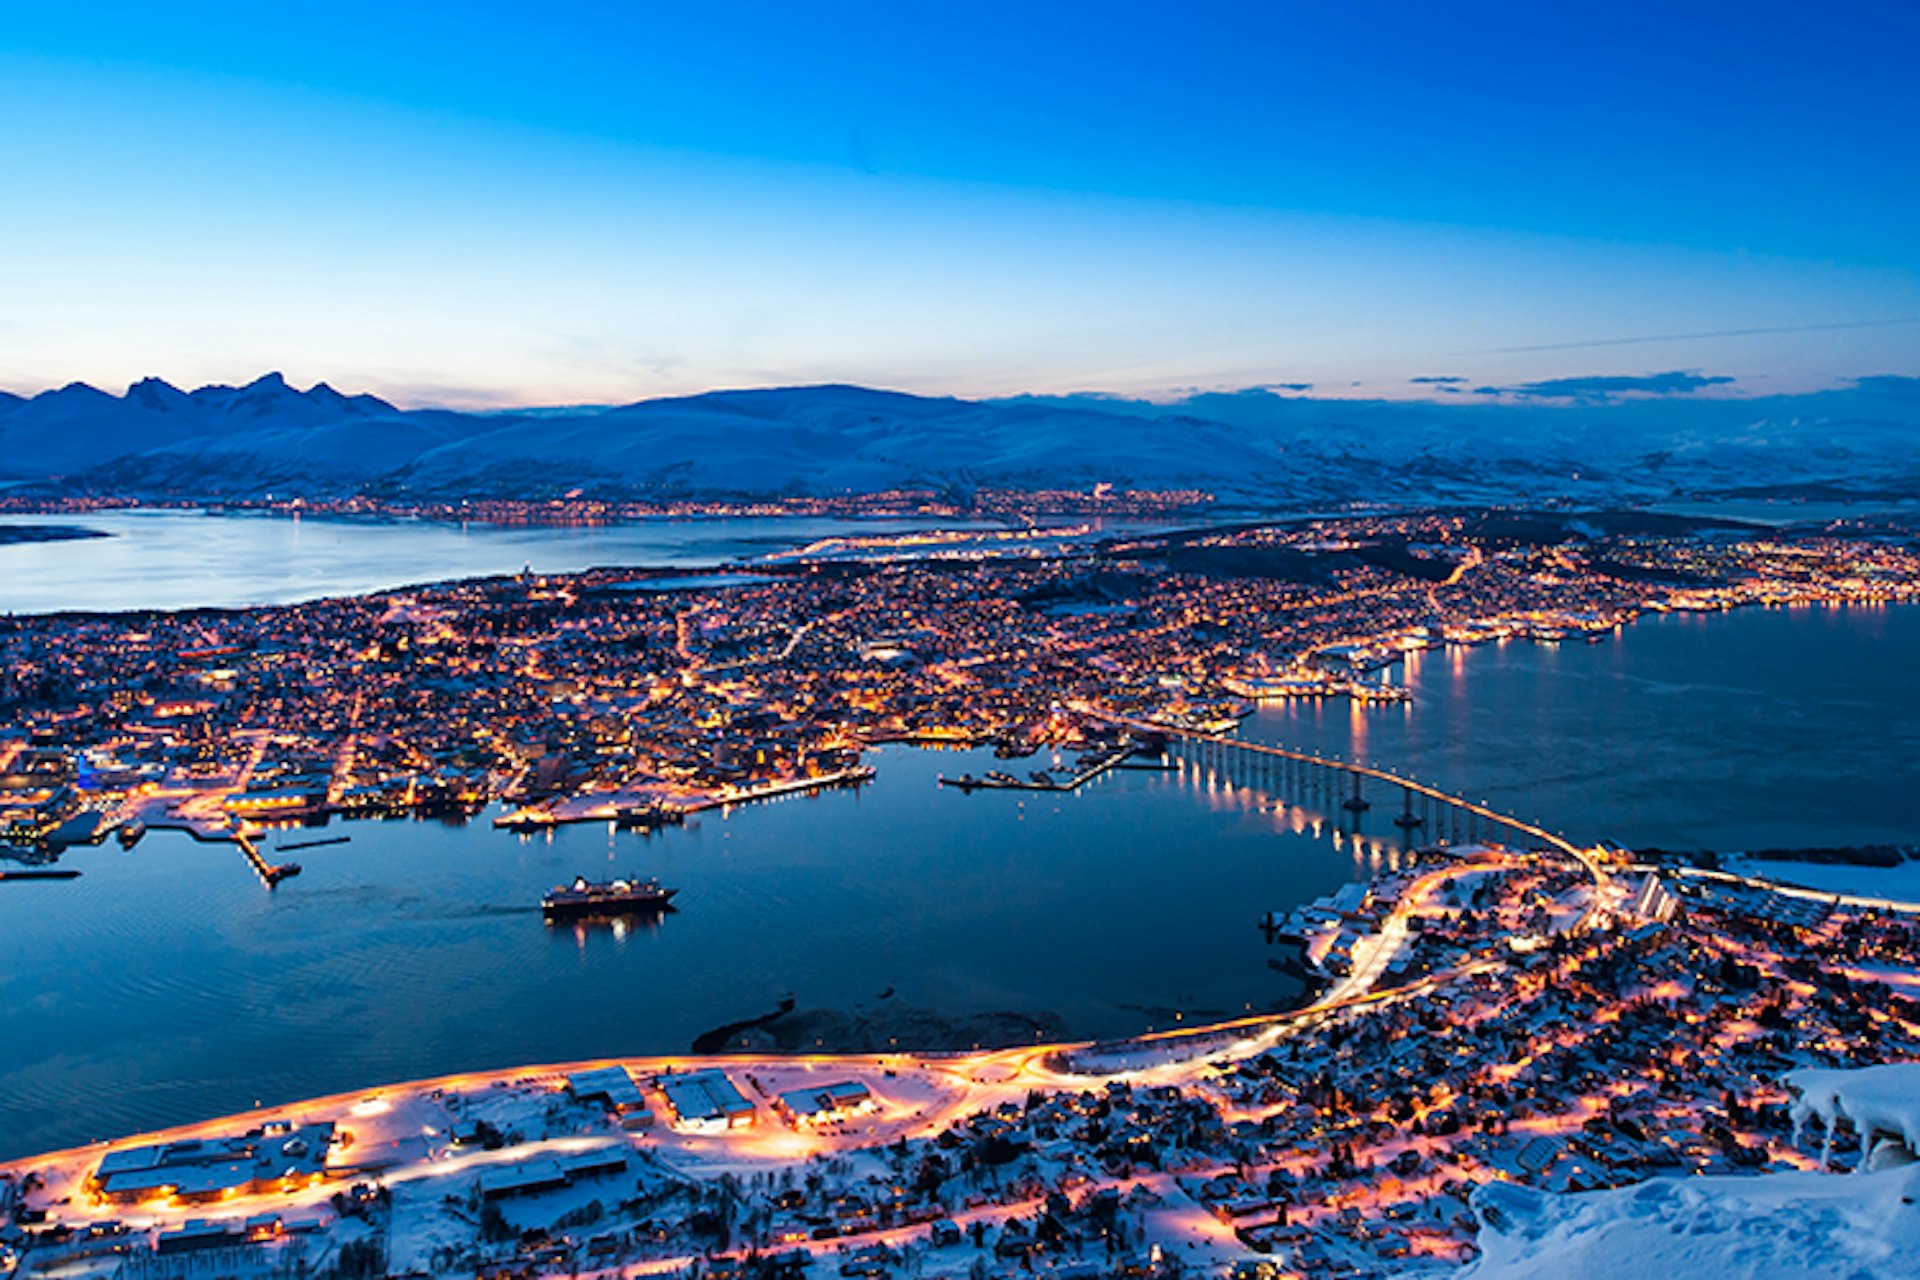 The floating, snowflake-shaped Krystall hotel will become another good reason to visit Tromsø. Image by V. Belov / Shutterstock